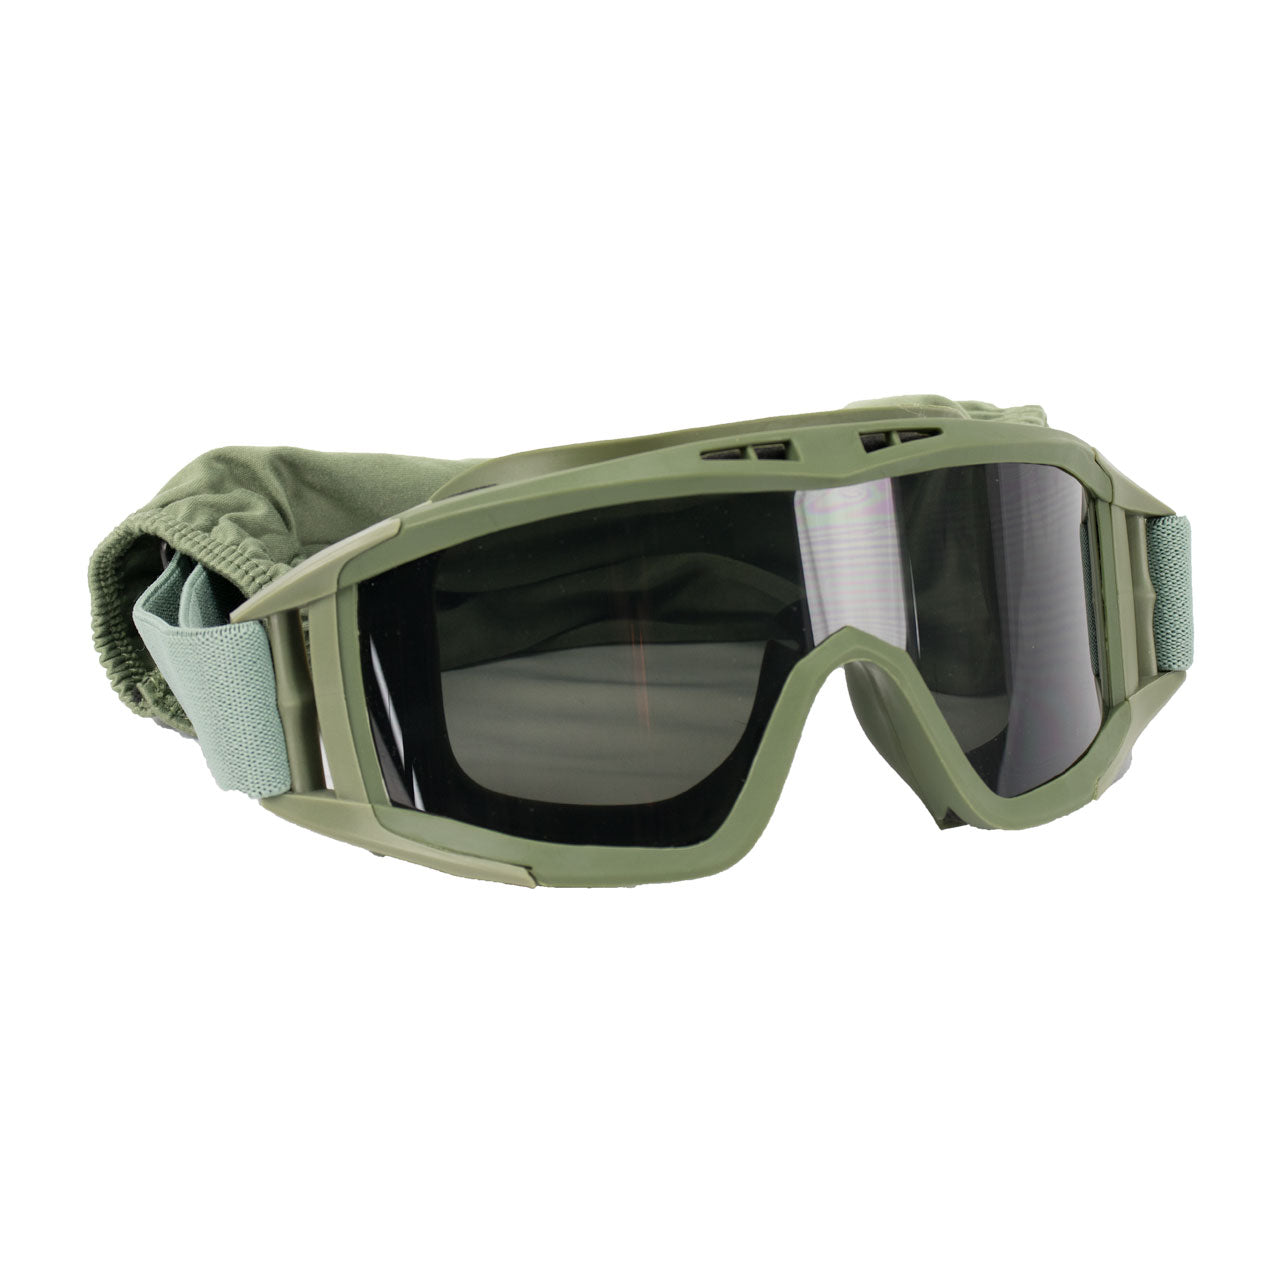 CM DL Tactical Goggles w/ spare lens and strap